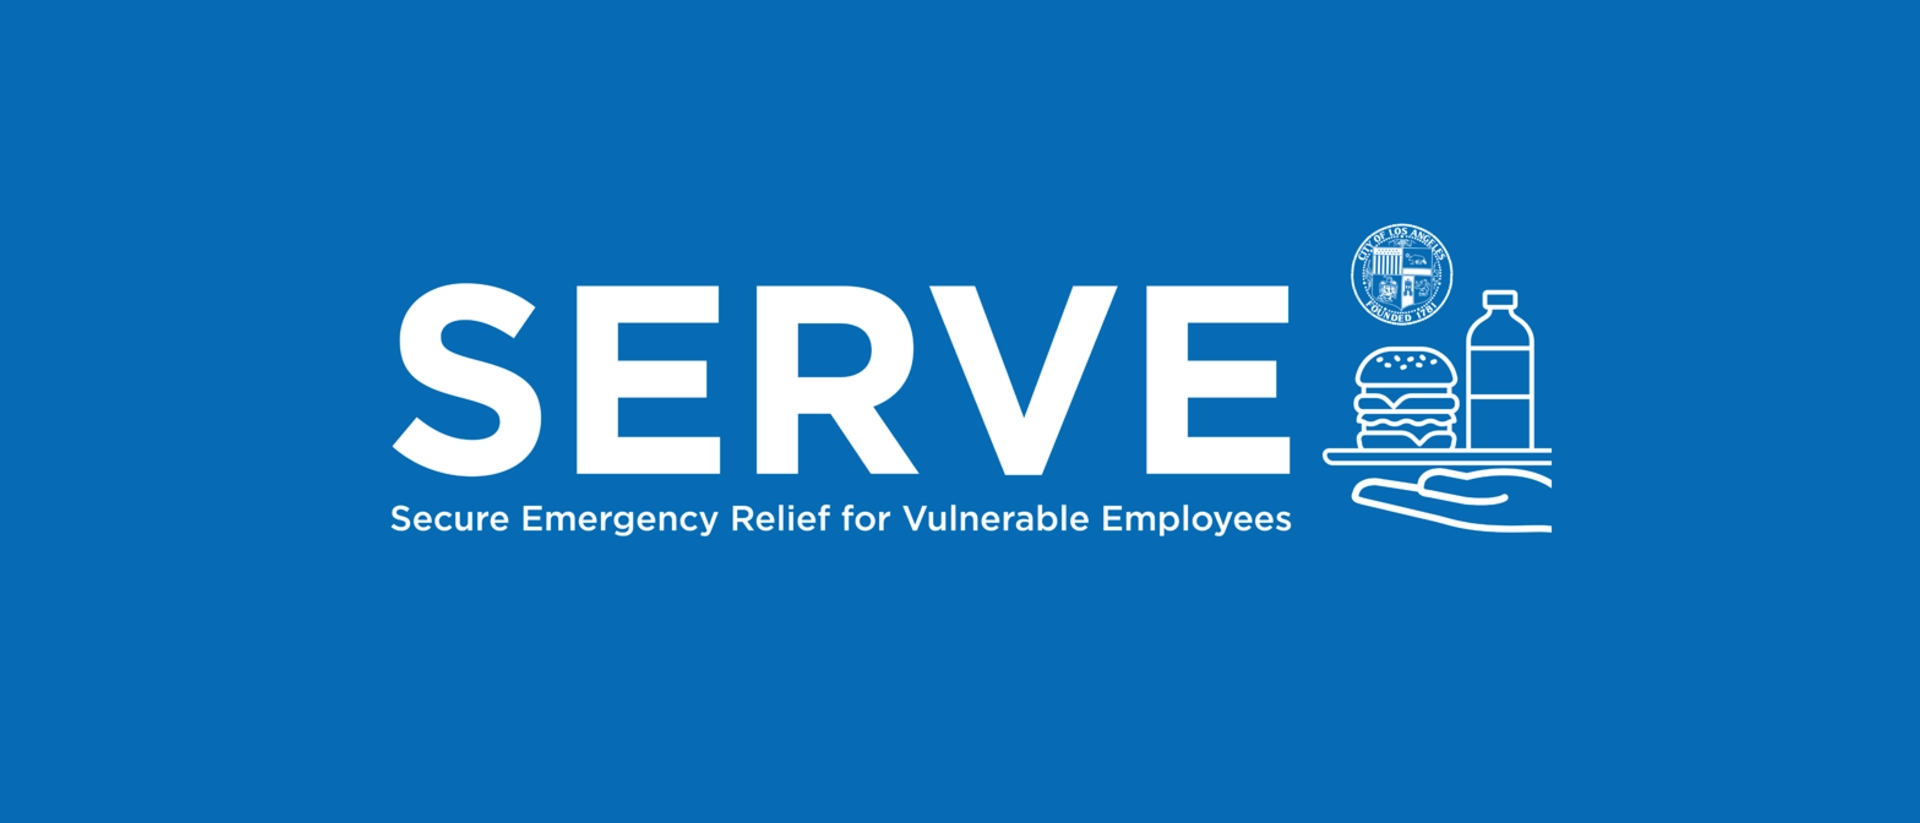 Flyer for the SERVE (Service Emergency Relief for Vulnerable Employees) Program